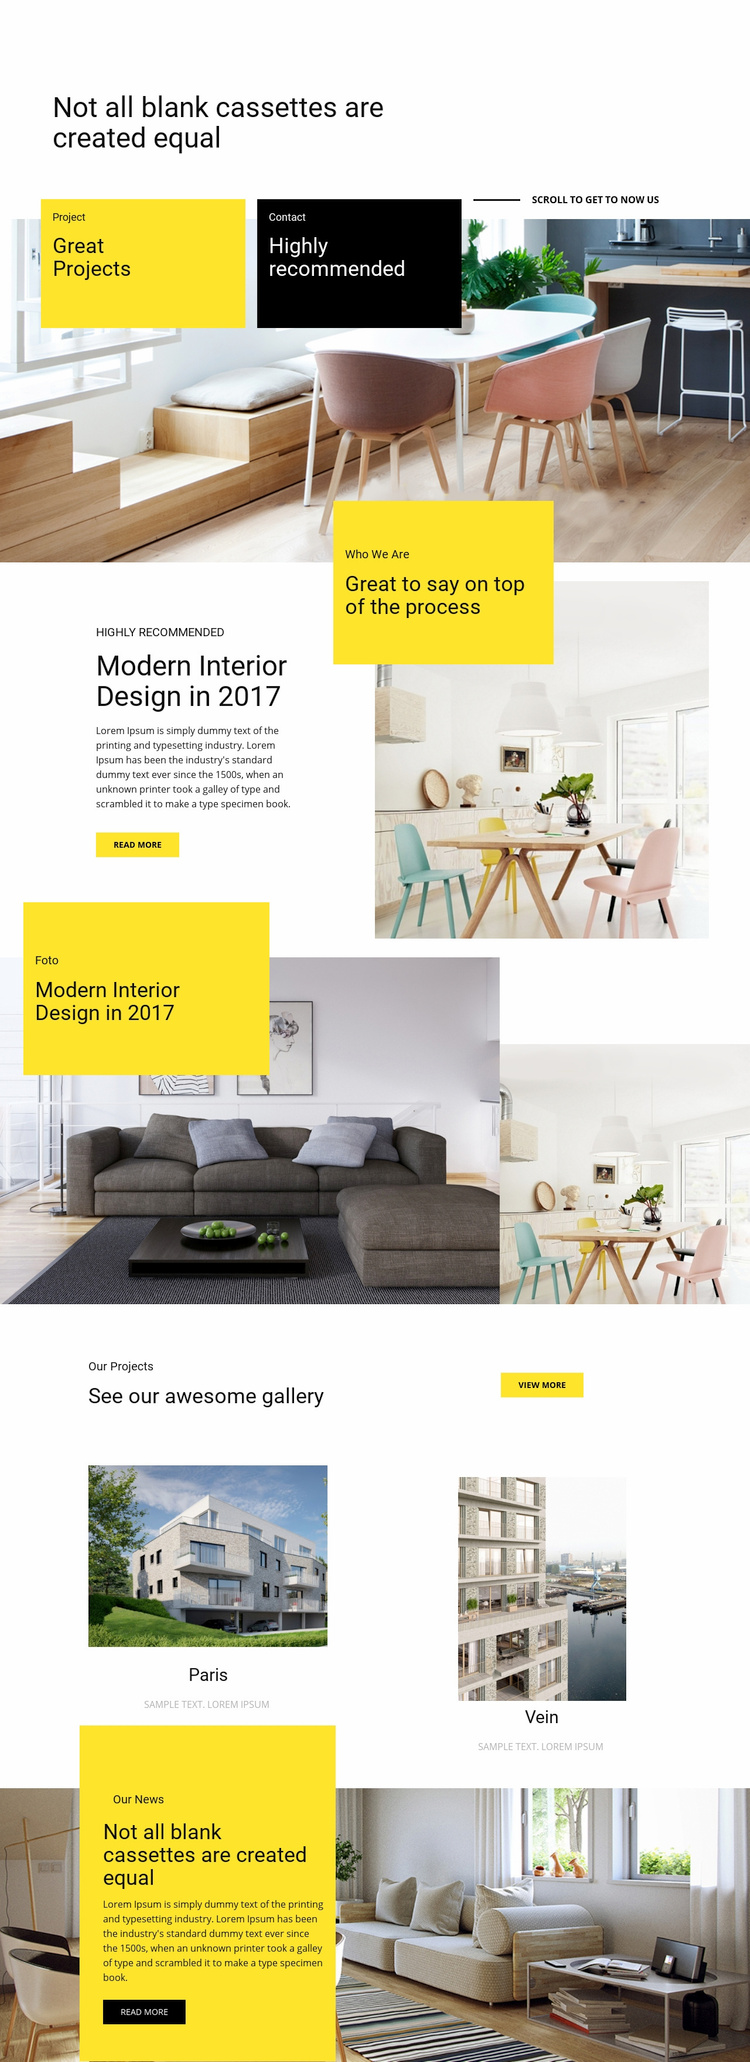 Great projects, high quality Wix Template Alternative